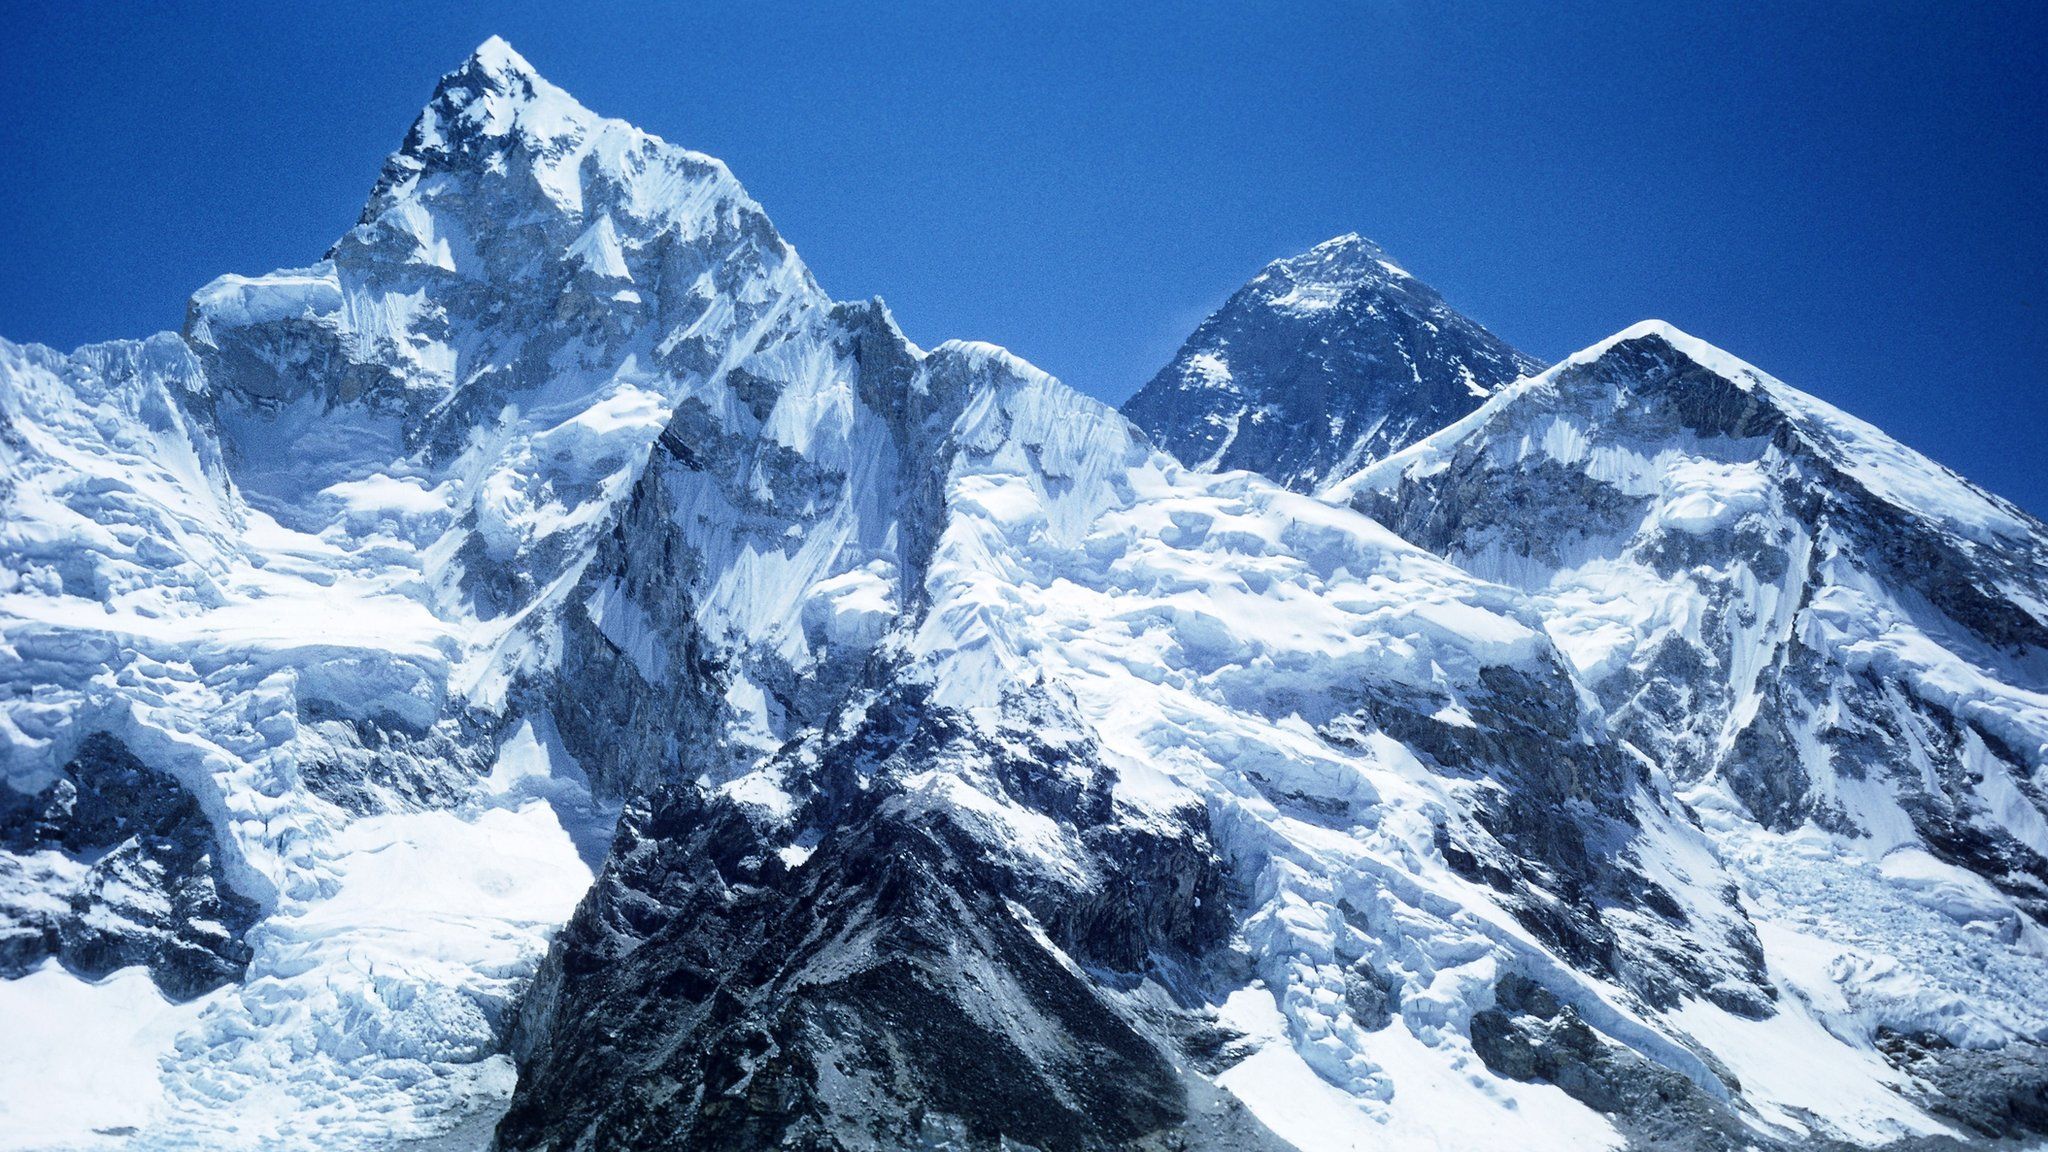 Mount Everest with the Khumbu Glacier and Nuptse in foreground viewed from Kala Pattar